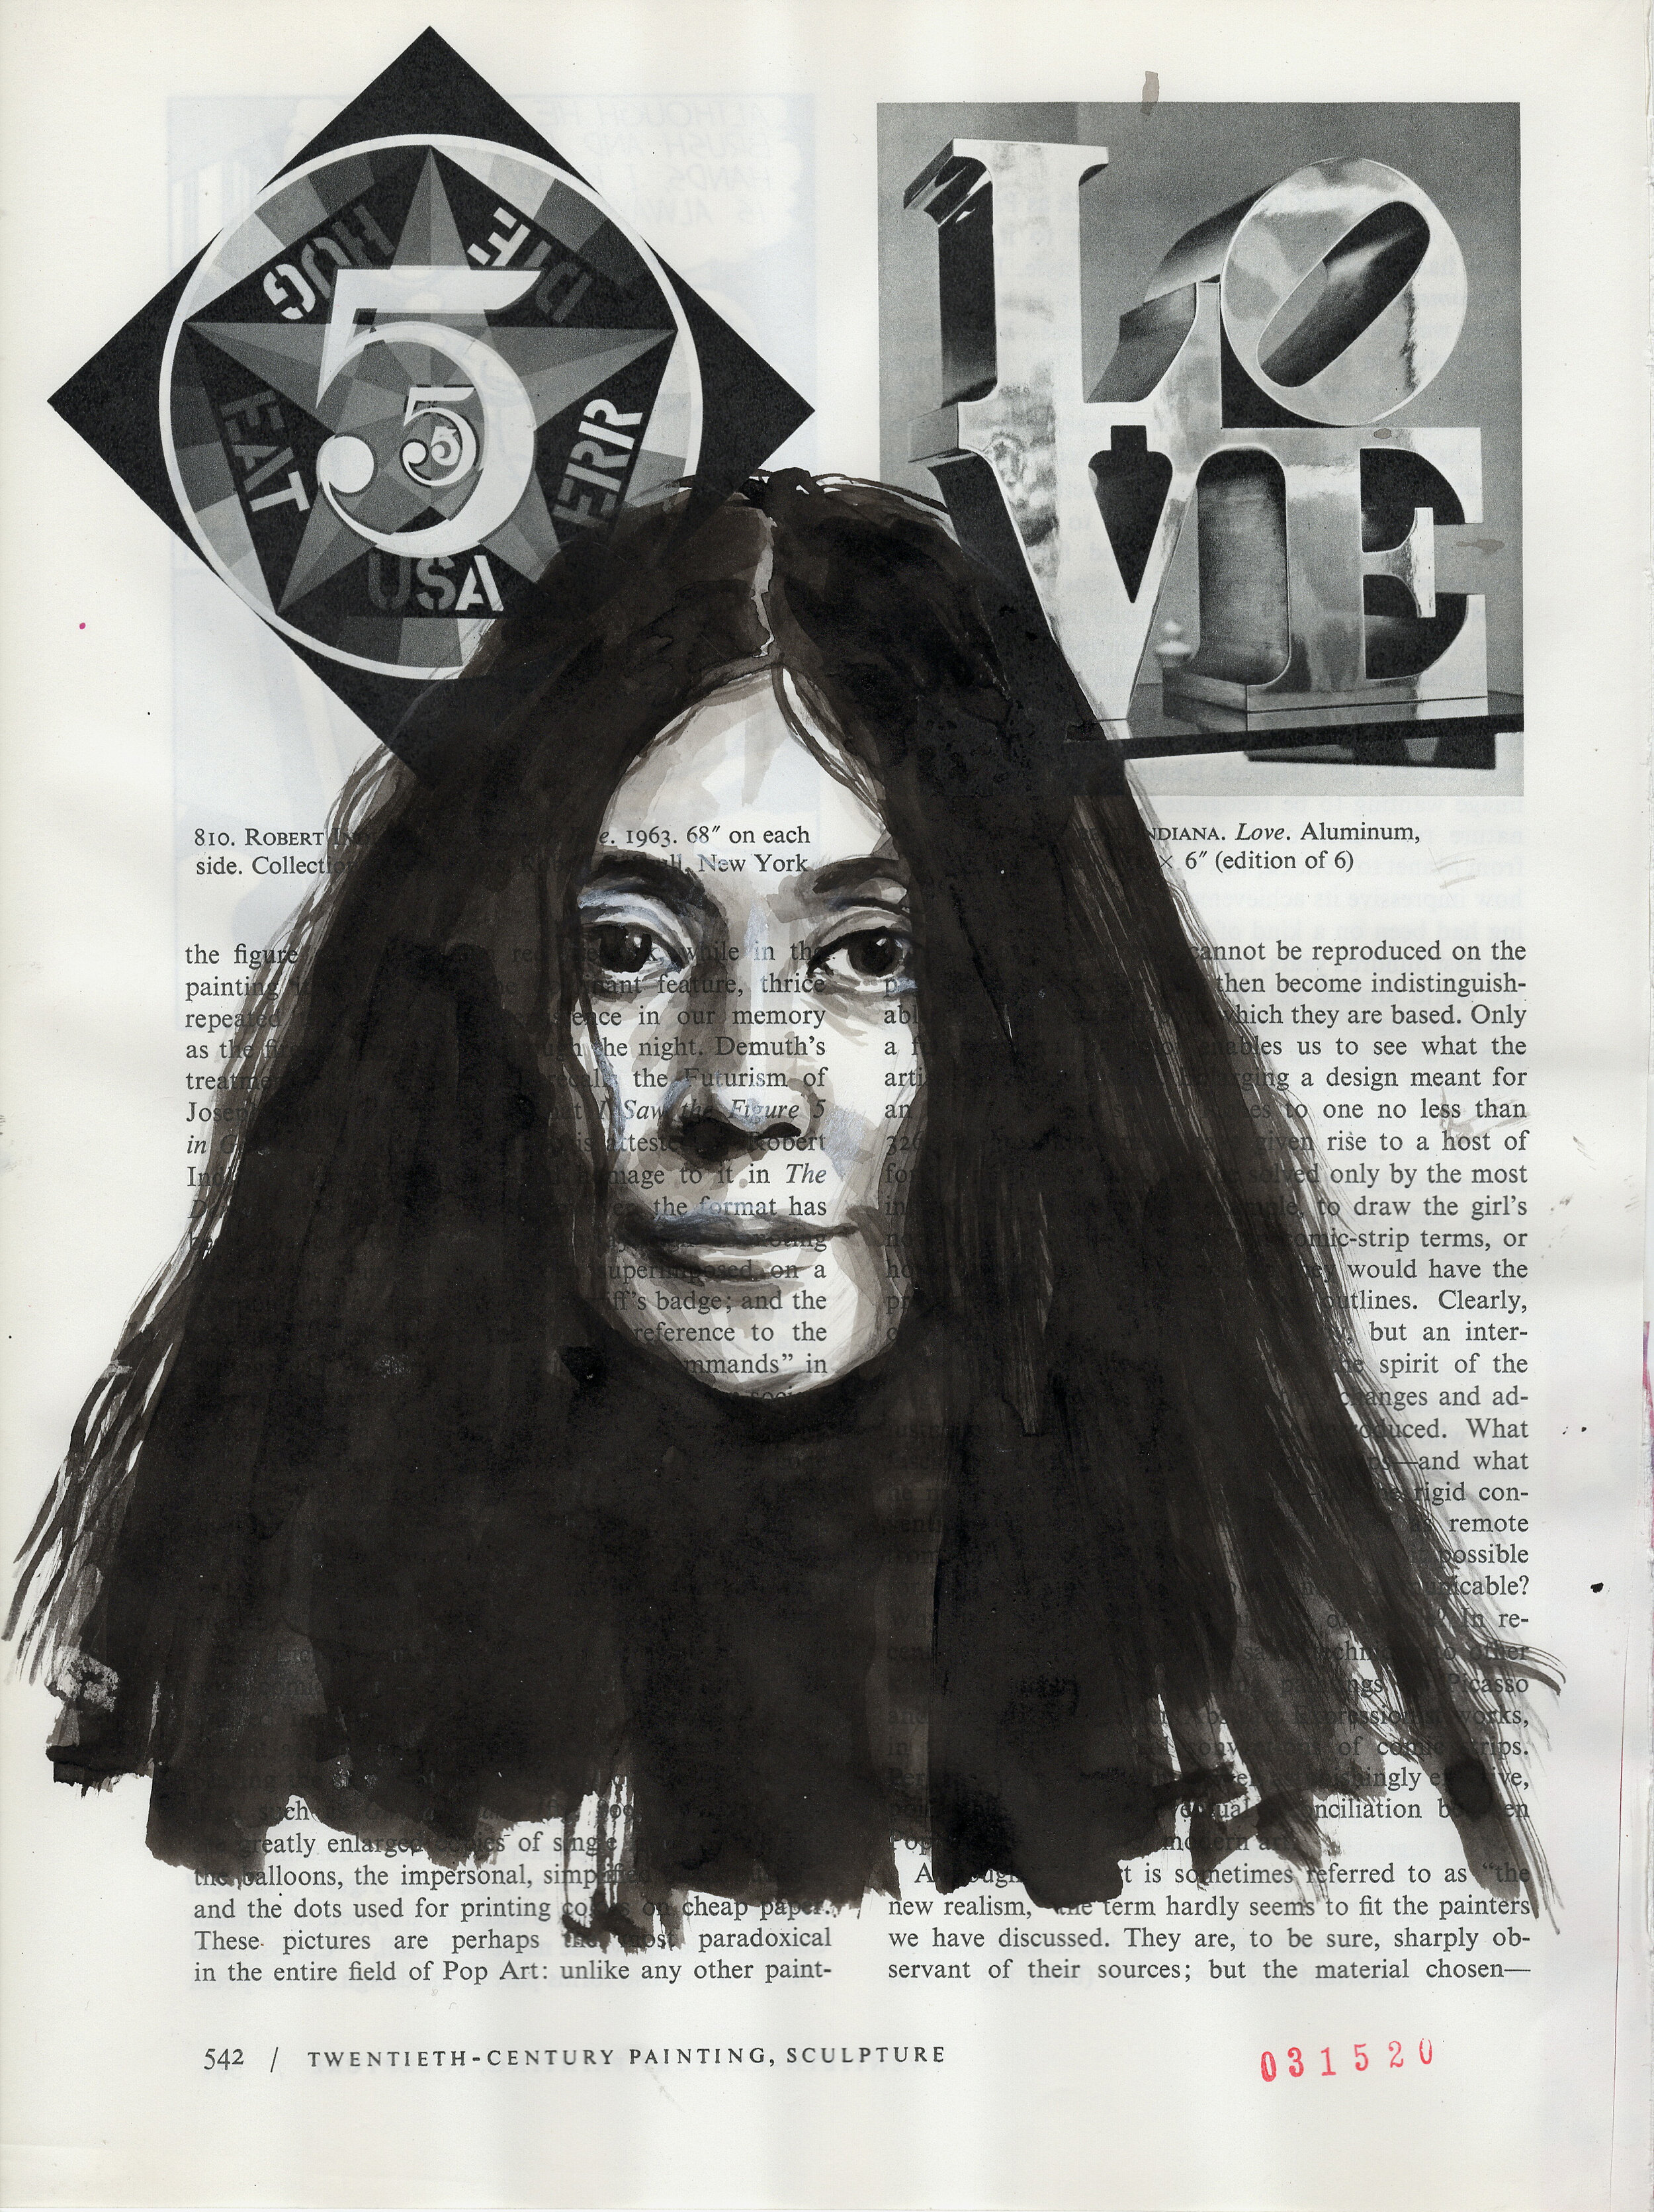 Abigail Ogilvy Gallery: Coral Woodbury, “Yoko Ono,” 2020, Sumi Ink on Book Page, 11.375 x 8.625 in.